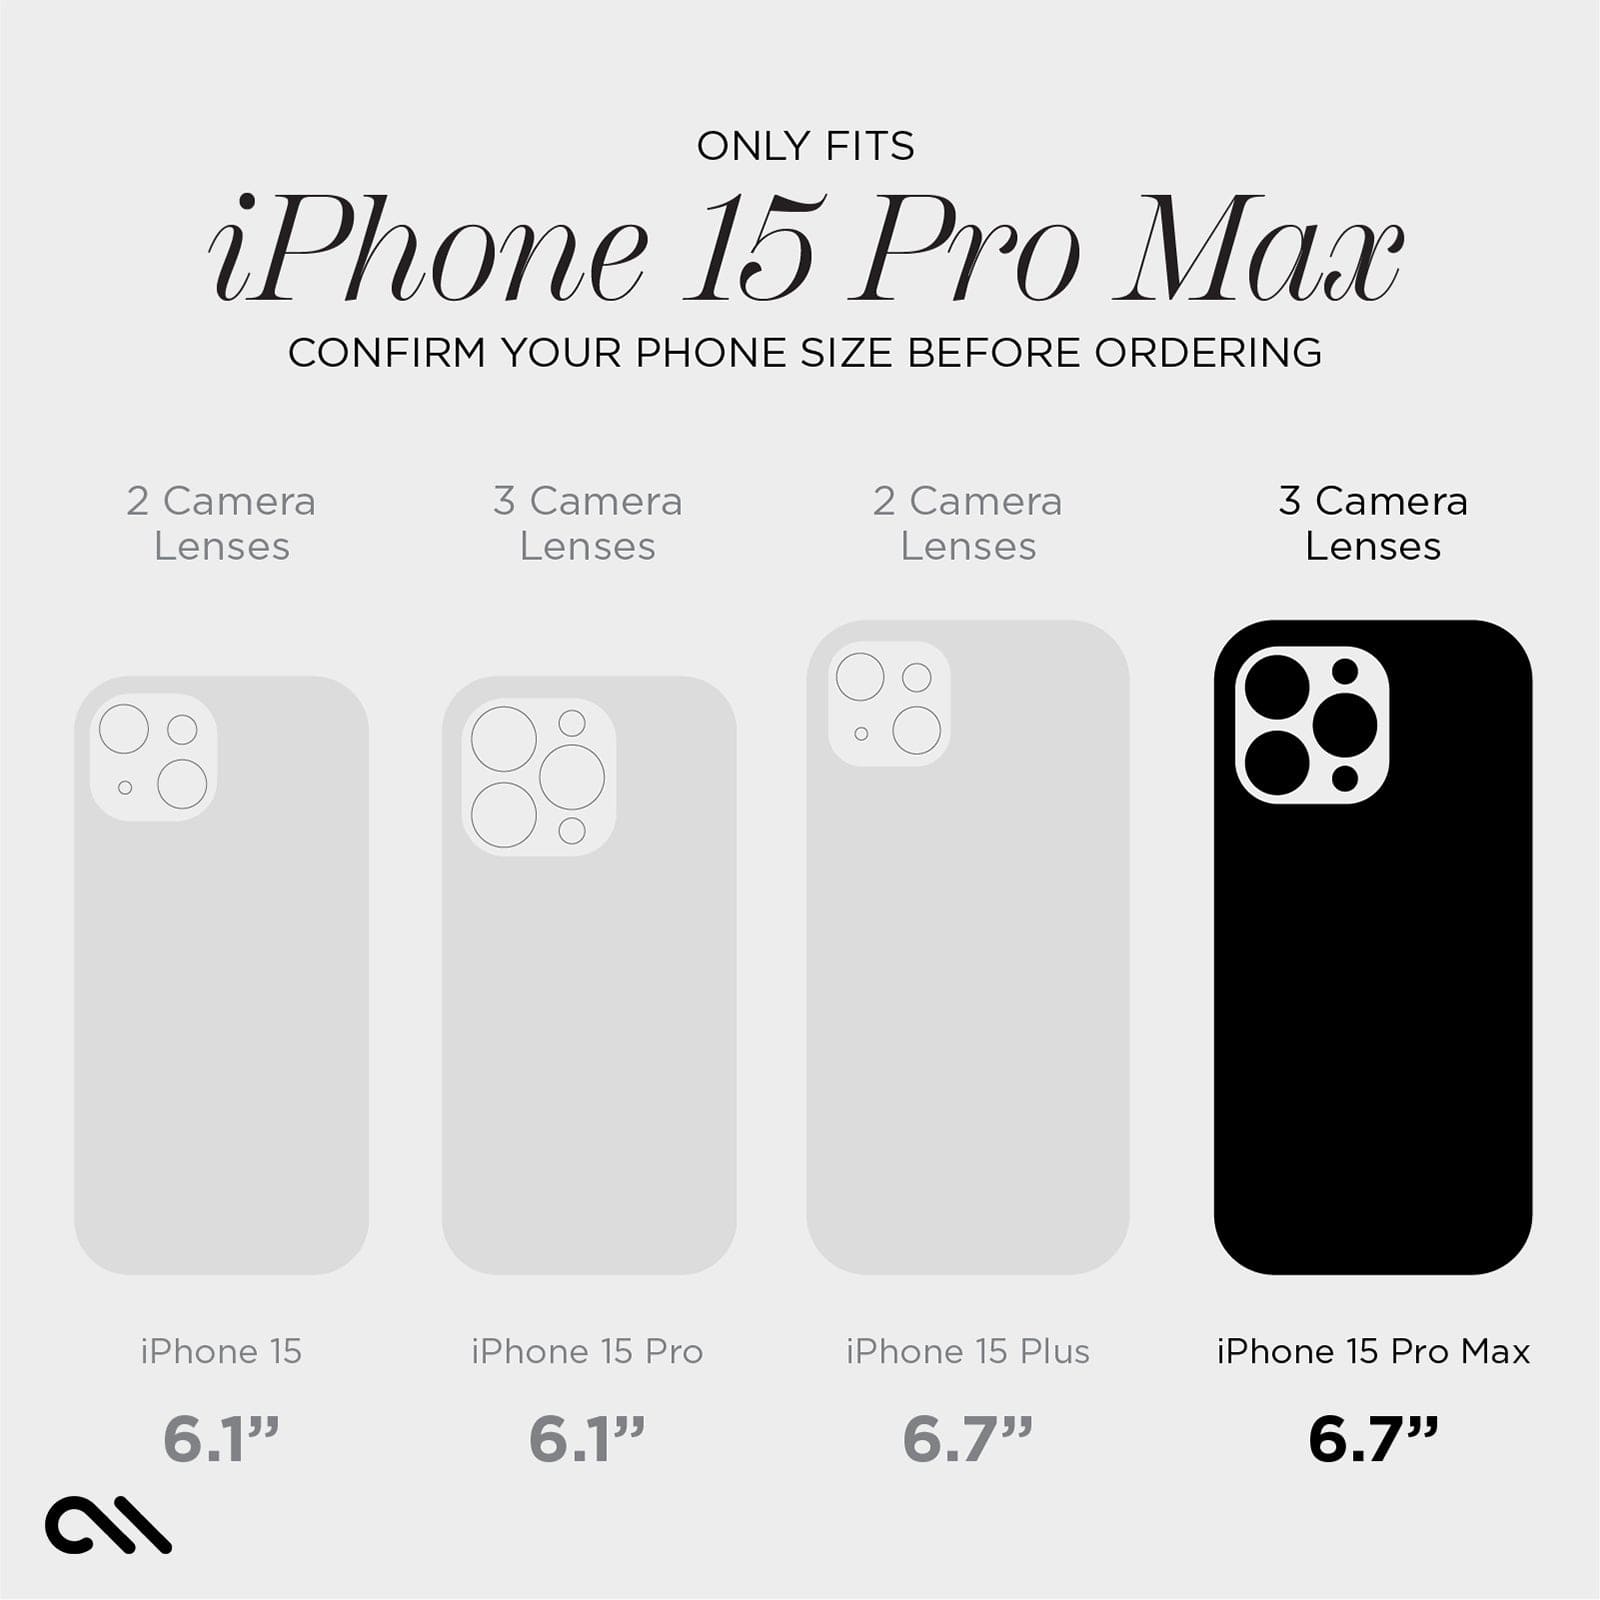 ONLY FITS IPHONE 15 PRO MAX. CONFIRM YOUR SIZE BEFORE ORDERING